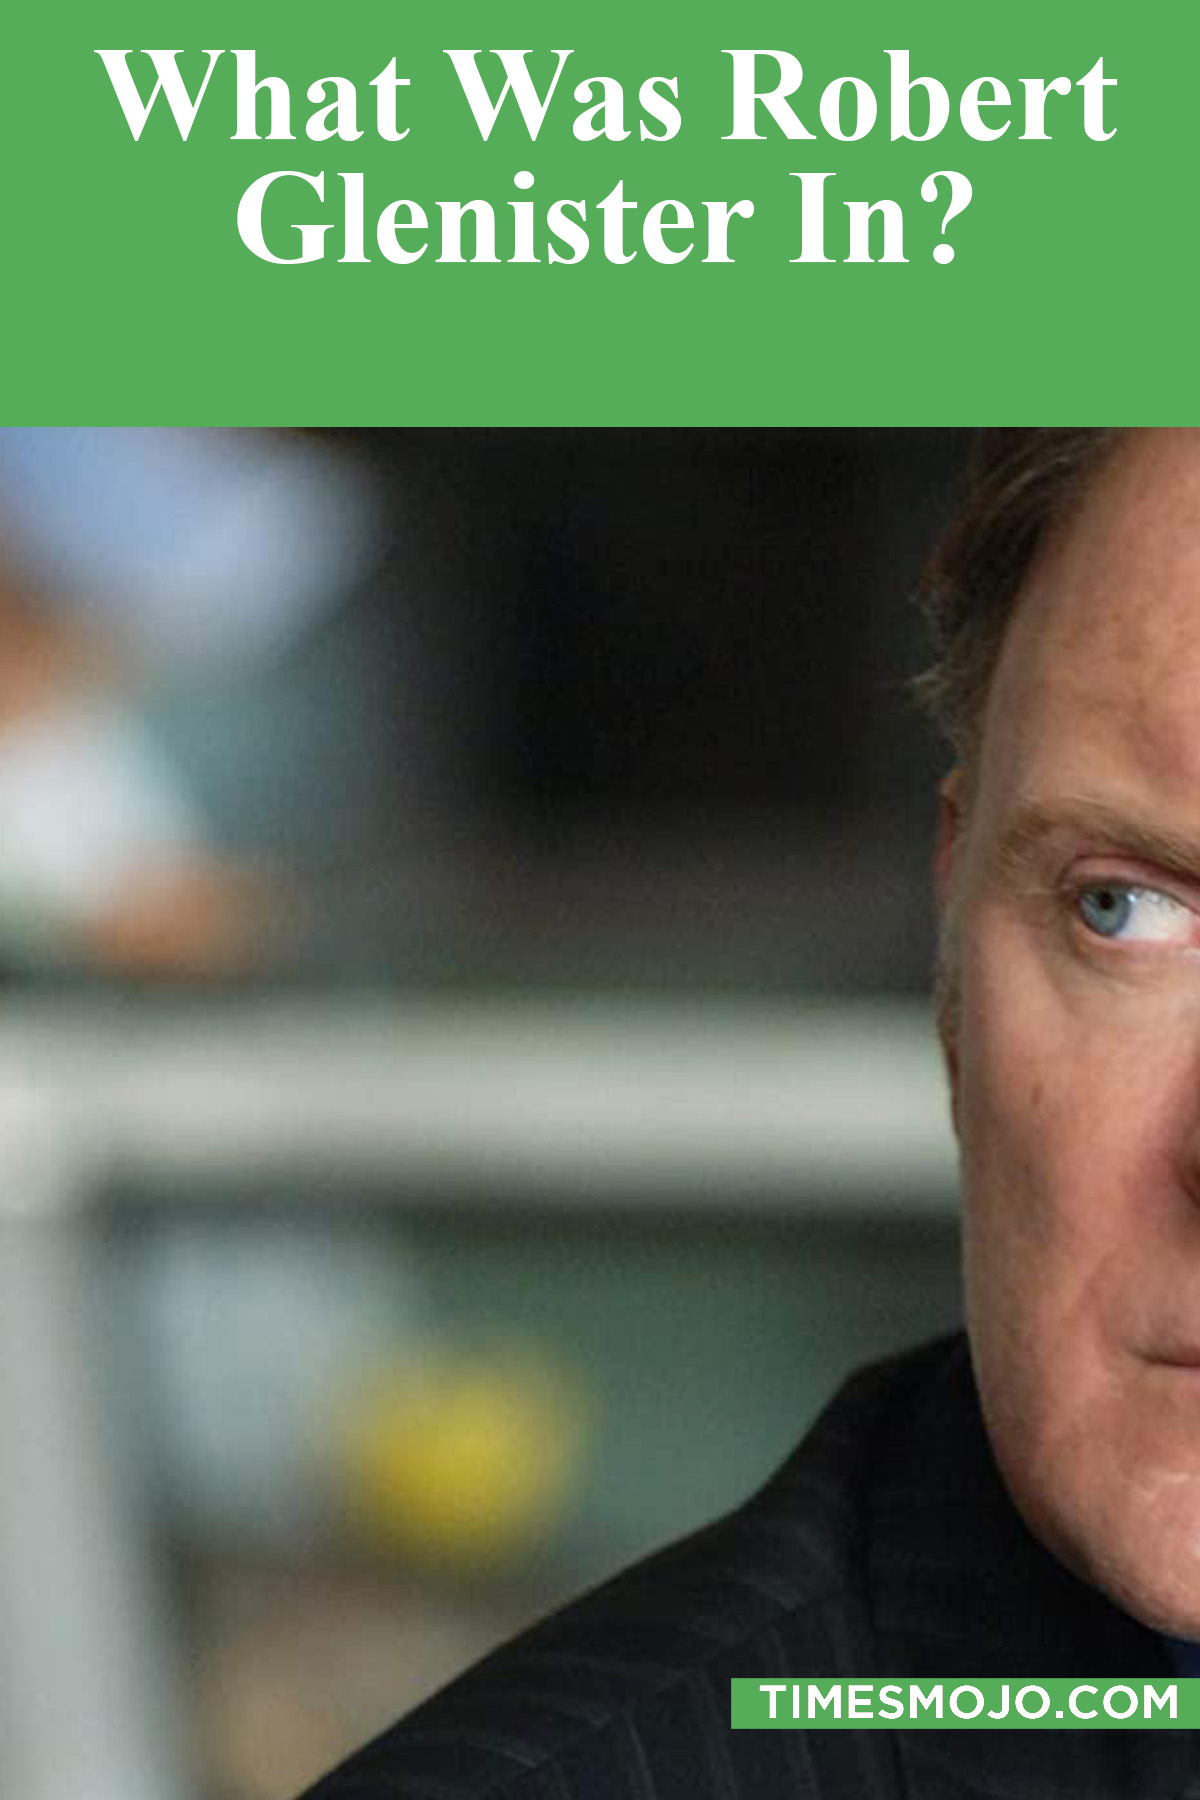 What Was Robert Glenister In